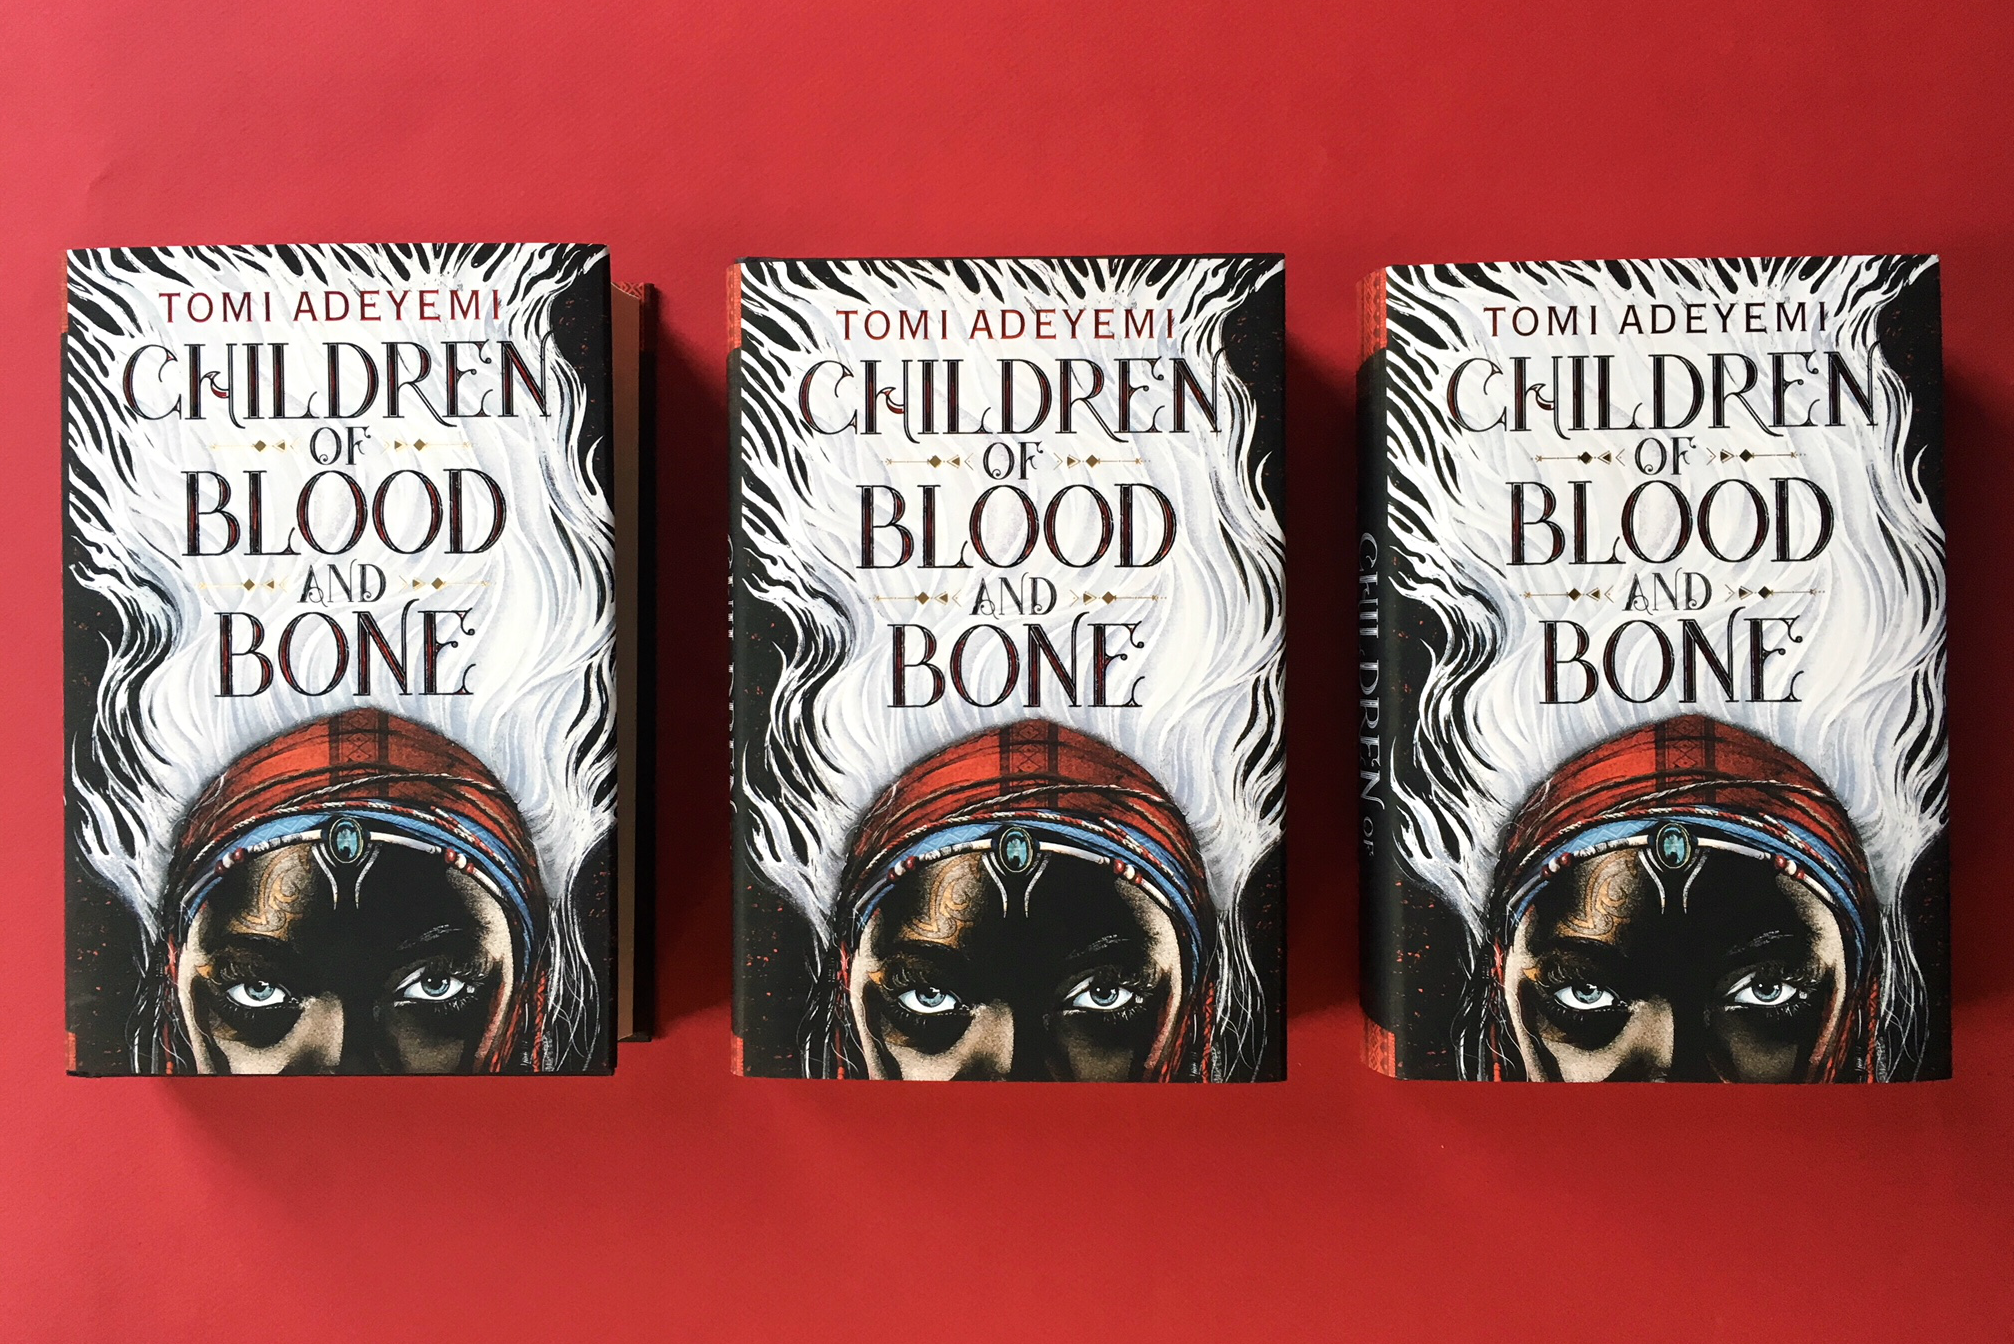 An Interview with Tomi Adeyemi, Author of CHILDREN OF BLOOD AND BONE